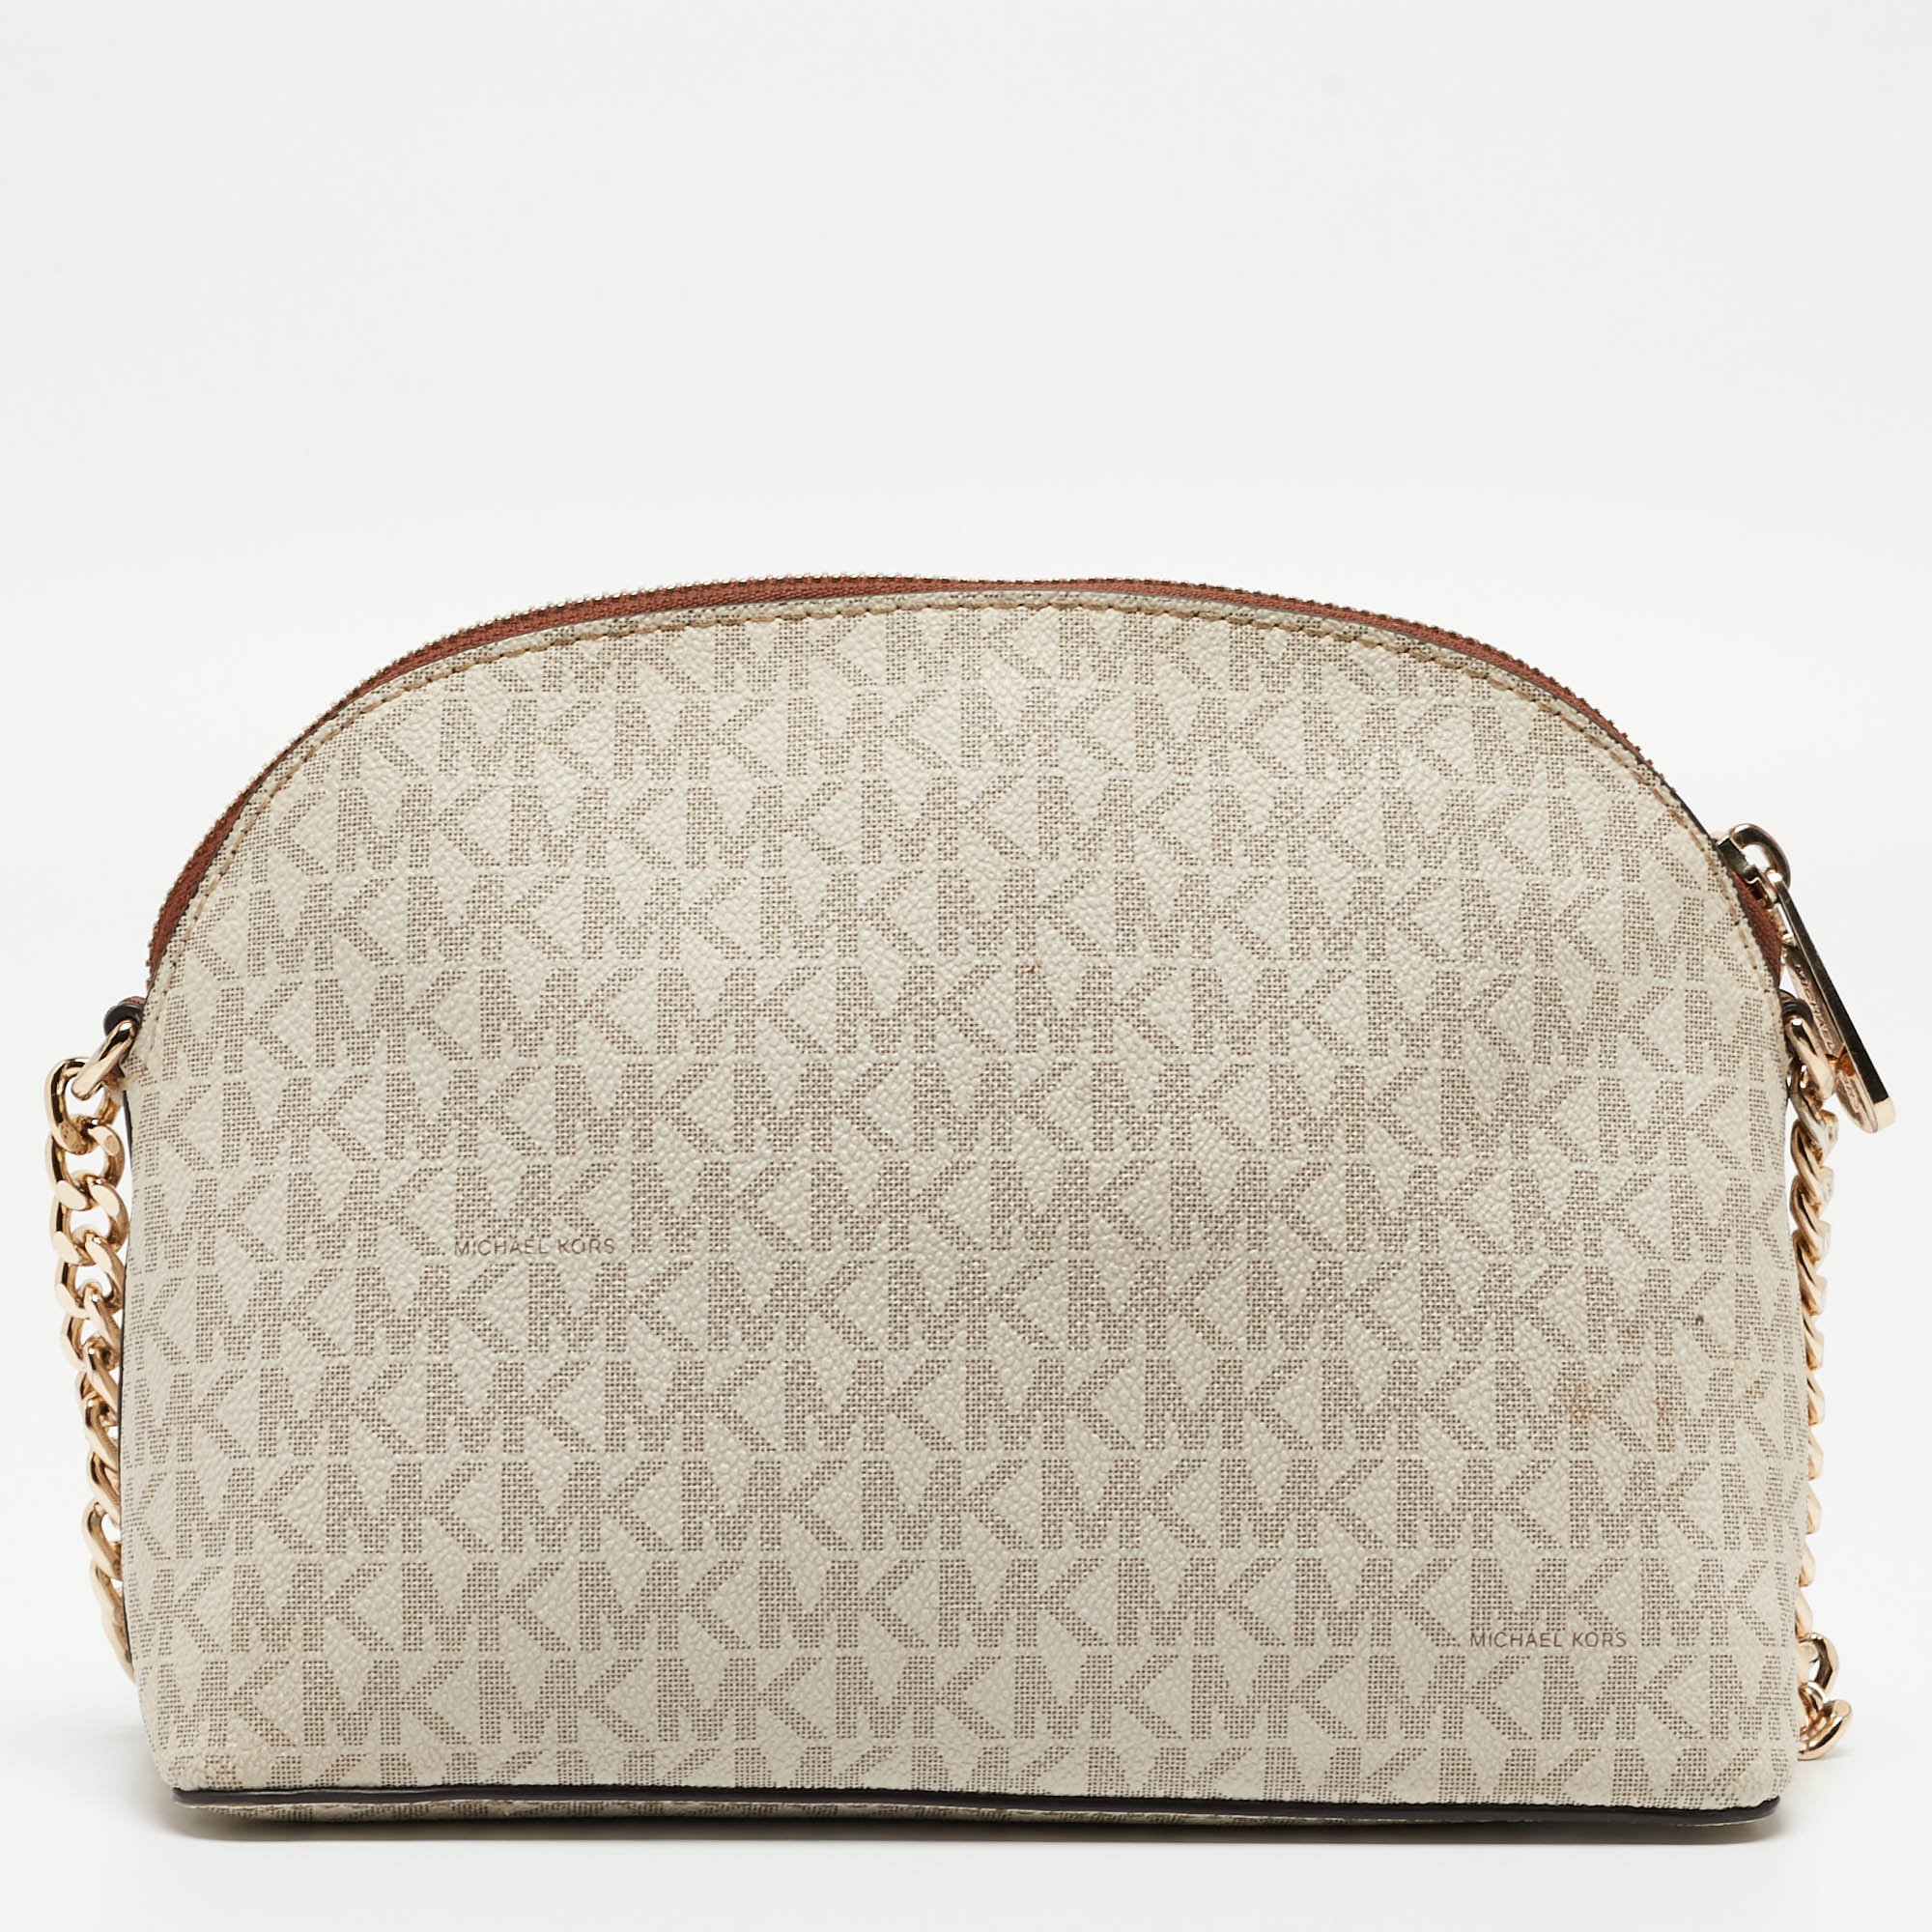 Michael Kors White/Brown Signature Canvas And Leather Jet Set Dome Crossbody Bag